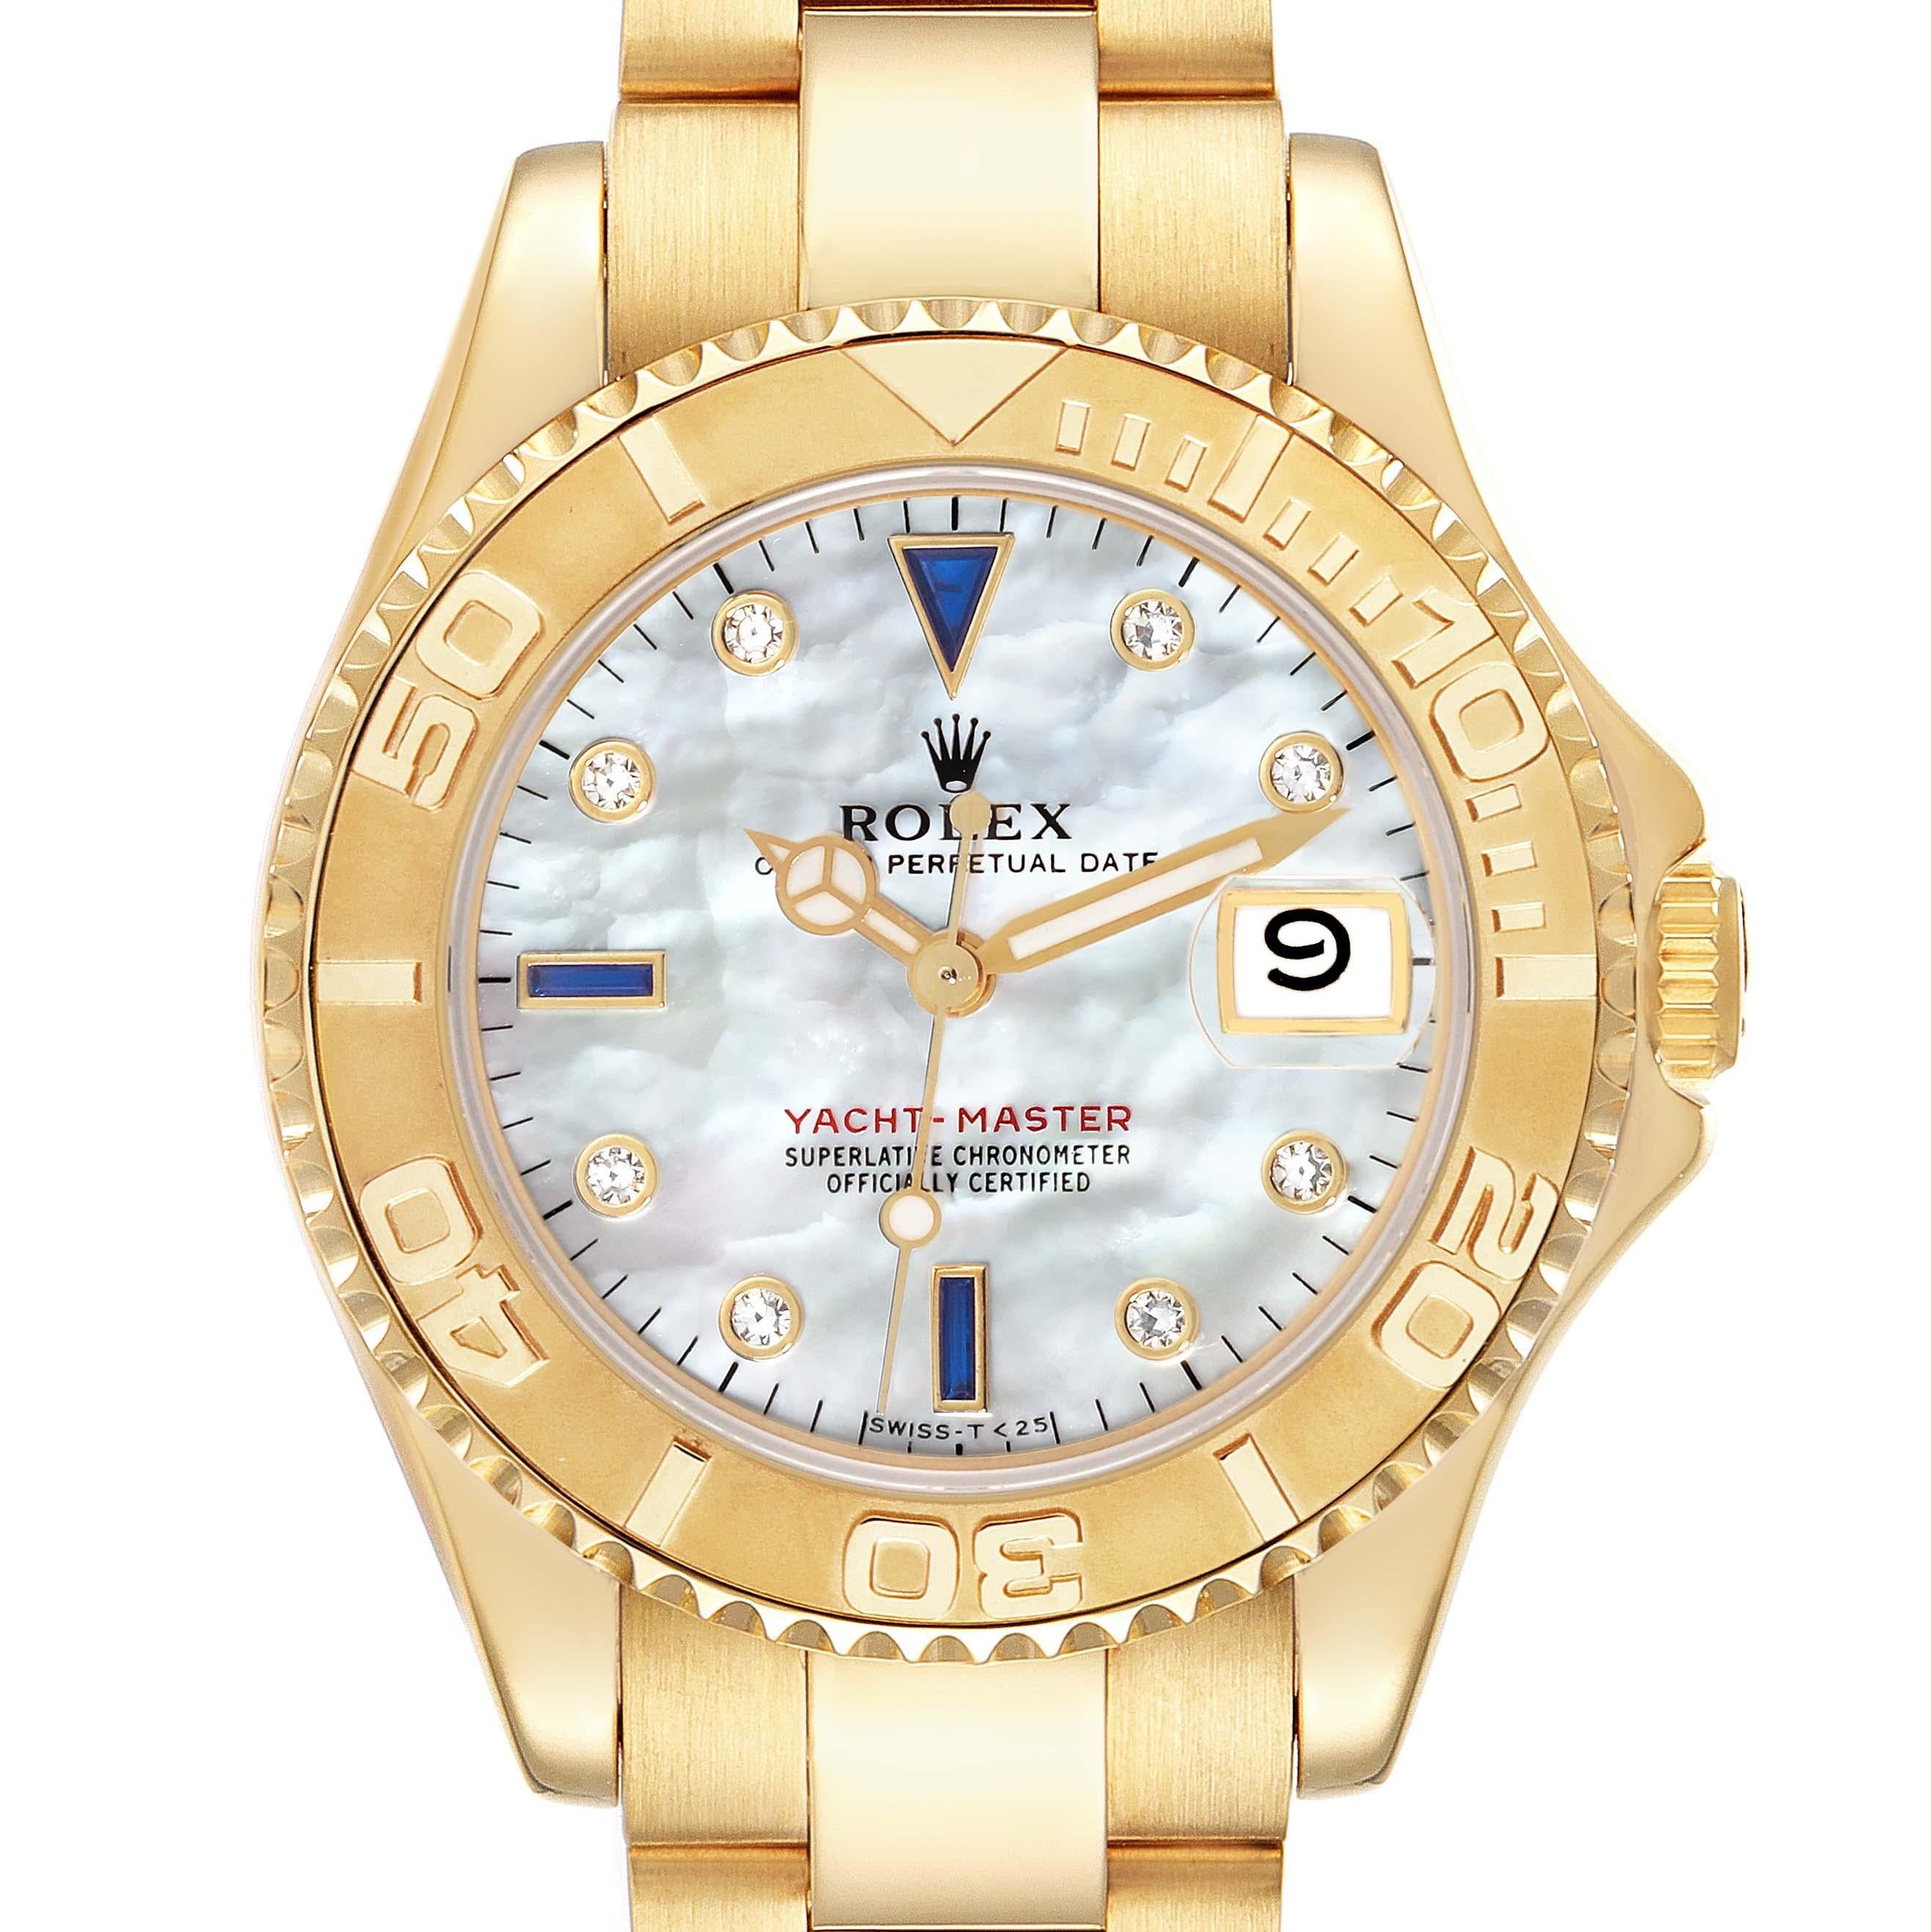 Rolex Yachtmaster Midsize Yellow Gold MOP Diamond Dial Mens Watch 68628. Officially certified chronometer self-winding movement. 18K yellow gold case 35.0 mm in diameter. Rolex logo on a crown. 18k yellow gold special time-lapse bi-directional